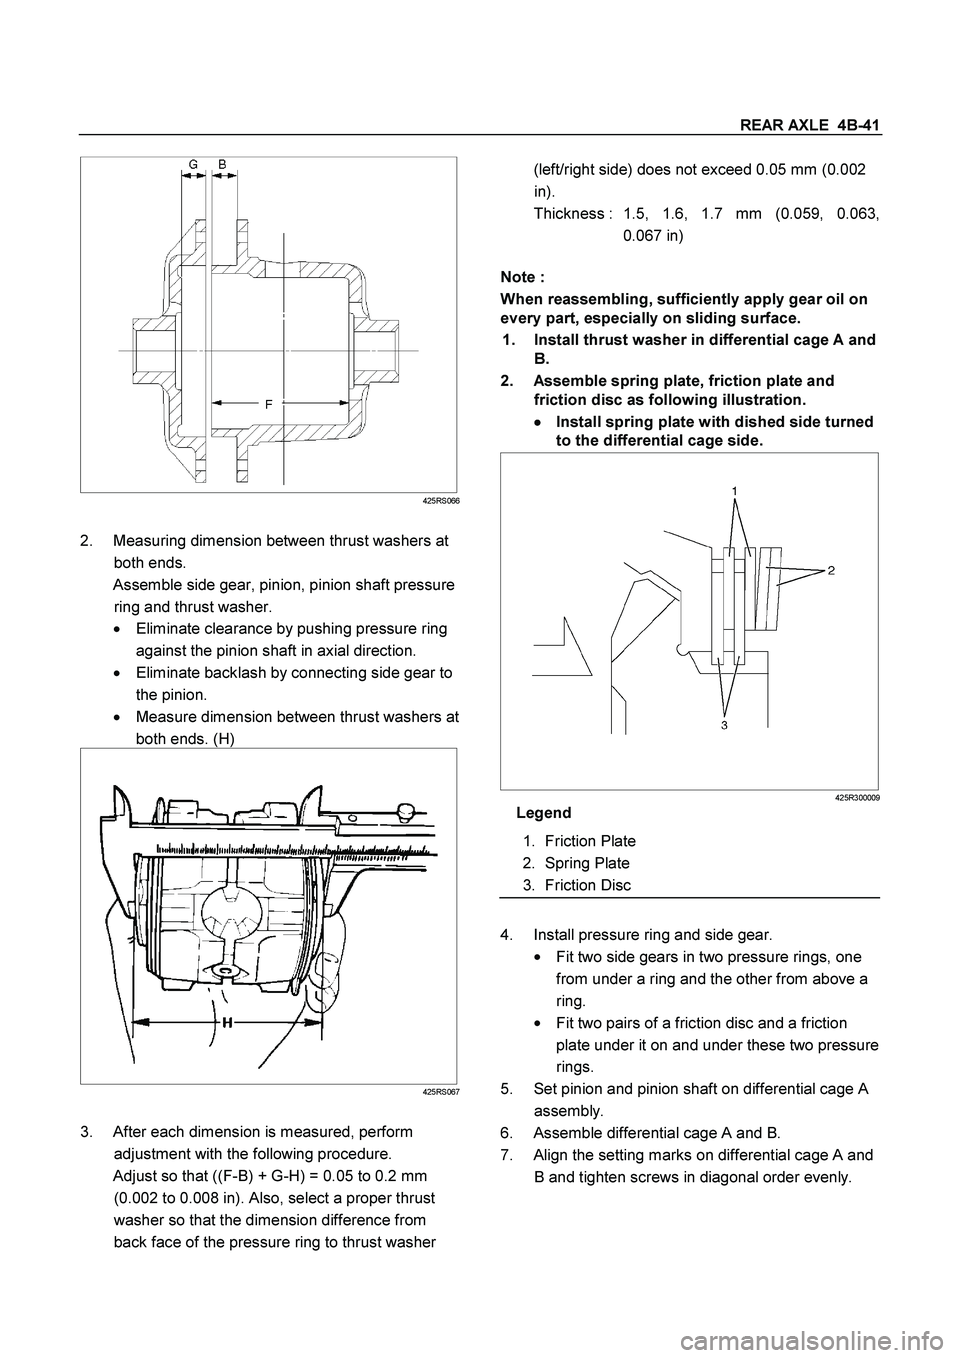 ISUZU TF SERIES 2004  Workshop Manual REAR AXLE  4B-41
 
 
 
425RS066
 
2.  Measuring dimension between thrust washers at 
both ends. 
  Assemble side gear, pinion, pinion shaft pressure 
ring and thrust washer. 
   Eliminate clearance b